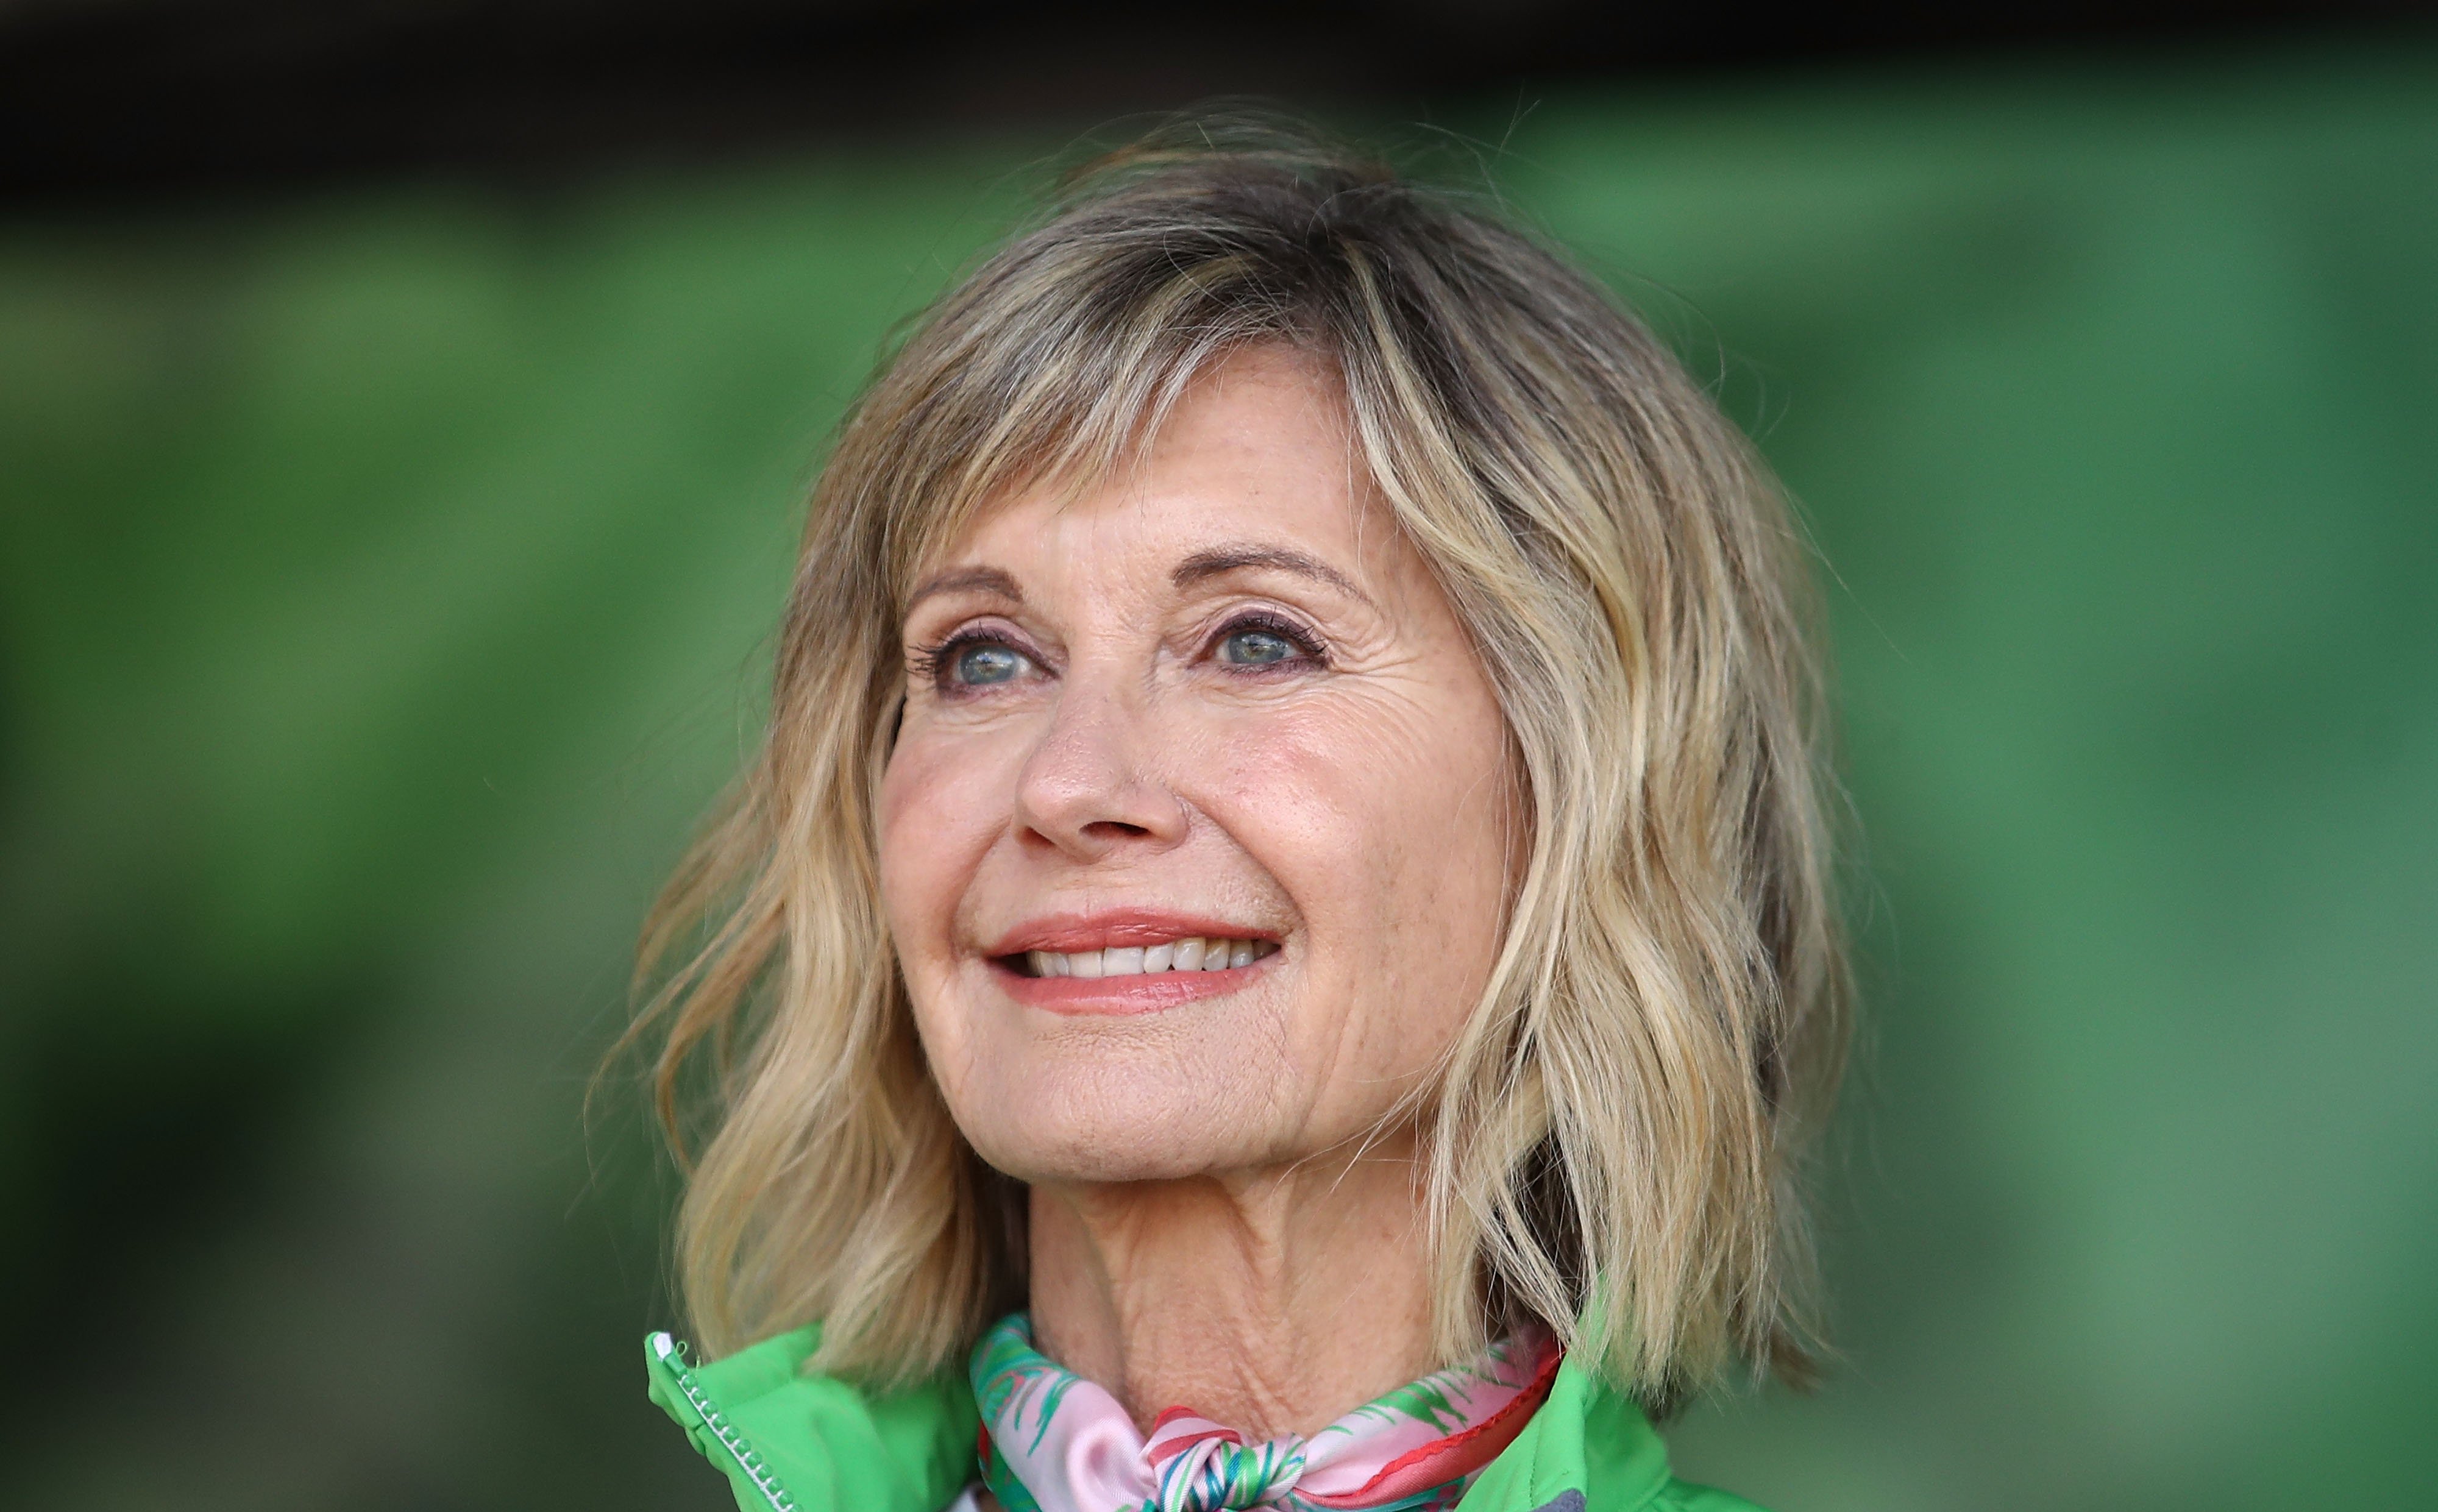 Olivia Newton-John at the annual Wellness Walk and Research Runon September 16, 2018 in Melbourne, Australia. | Source: Getty Images